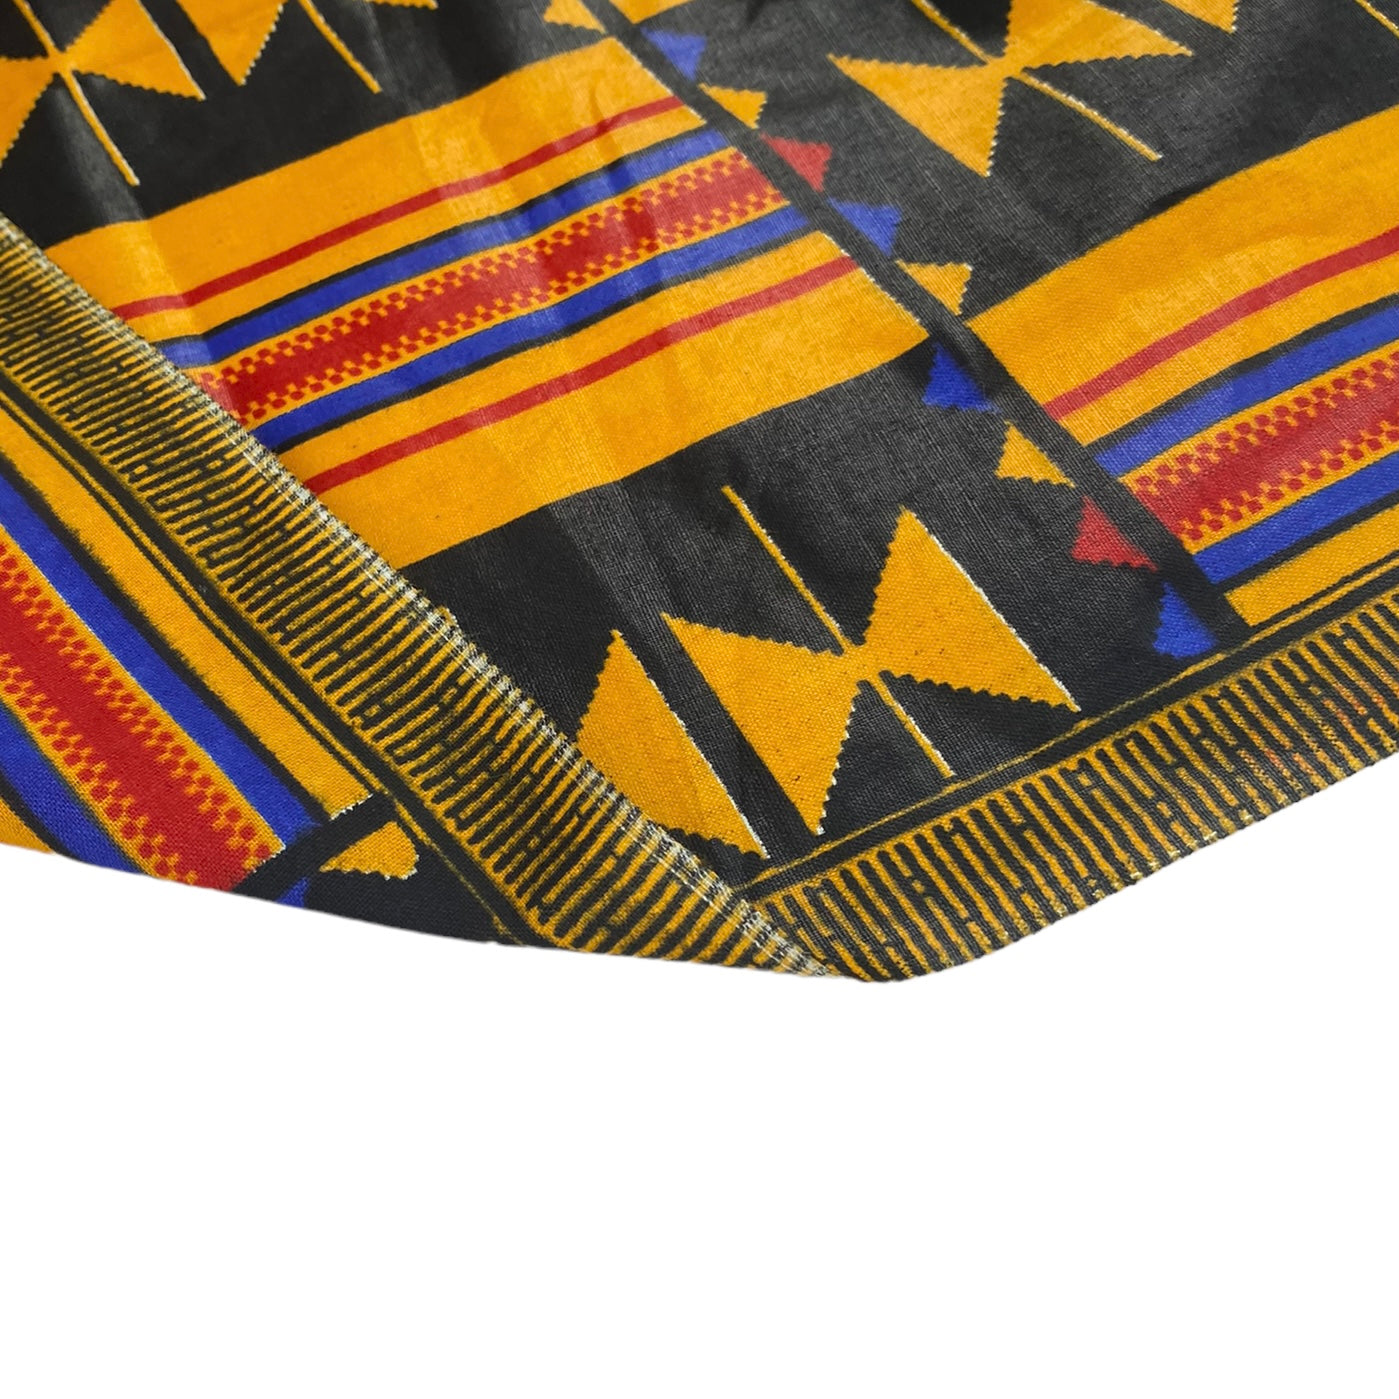 Waxed African Printed Cotton - Multi-Colour / Orange